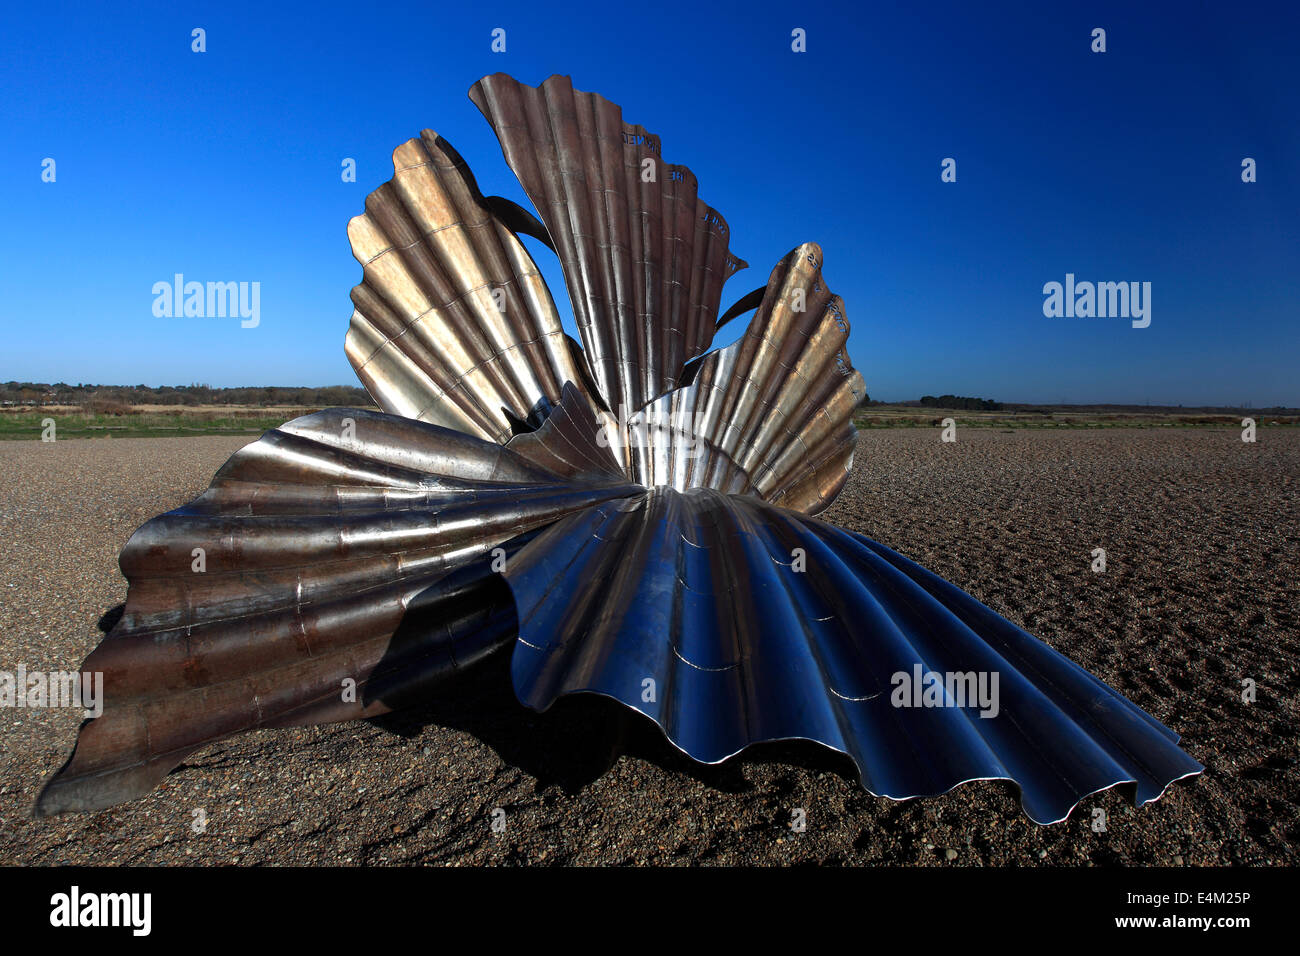 The Scallop shell sculpture by Maggie Hambling, shingle beach Aldeburgh town, Suffolk County, East Anglia, England. Stock Photo